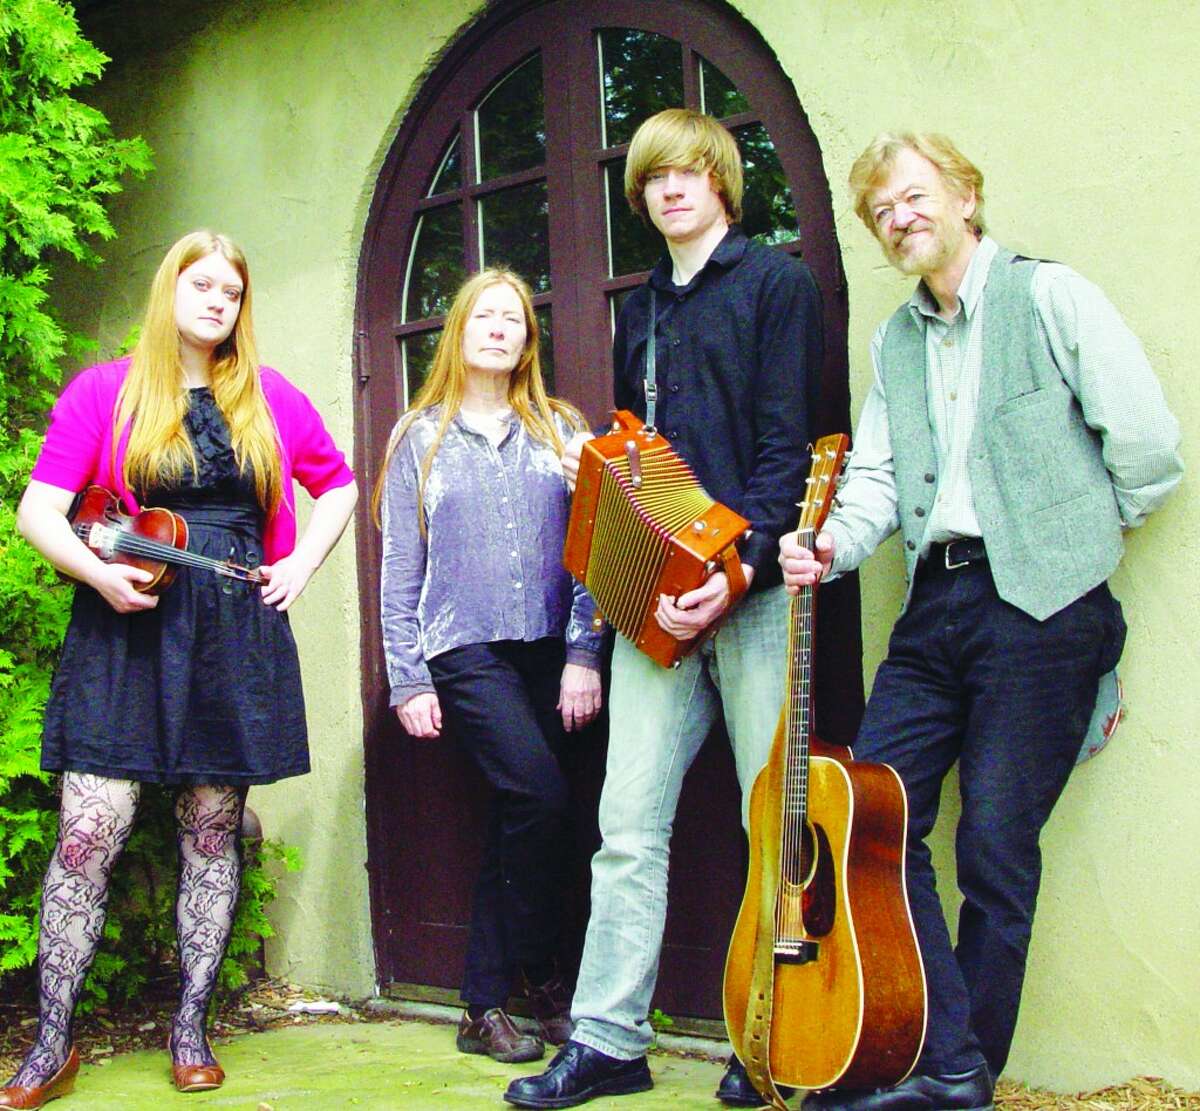 BRINGING IRELAND TO BENZIE COUNTY: Finvarra’s Wren will be performing at the Mills Community House in Benzonia on Saturday, March 2 at 7:30 p.m. A family quartet, they will perform a variety of reels, jigs and stories.